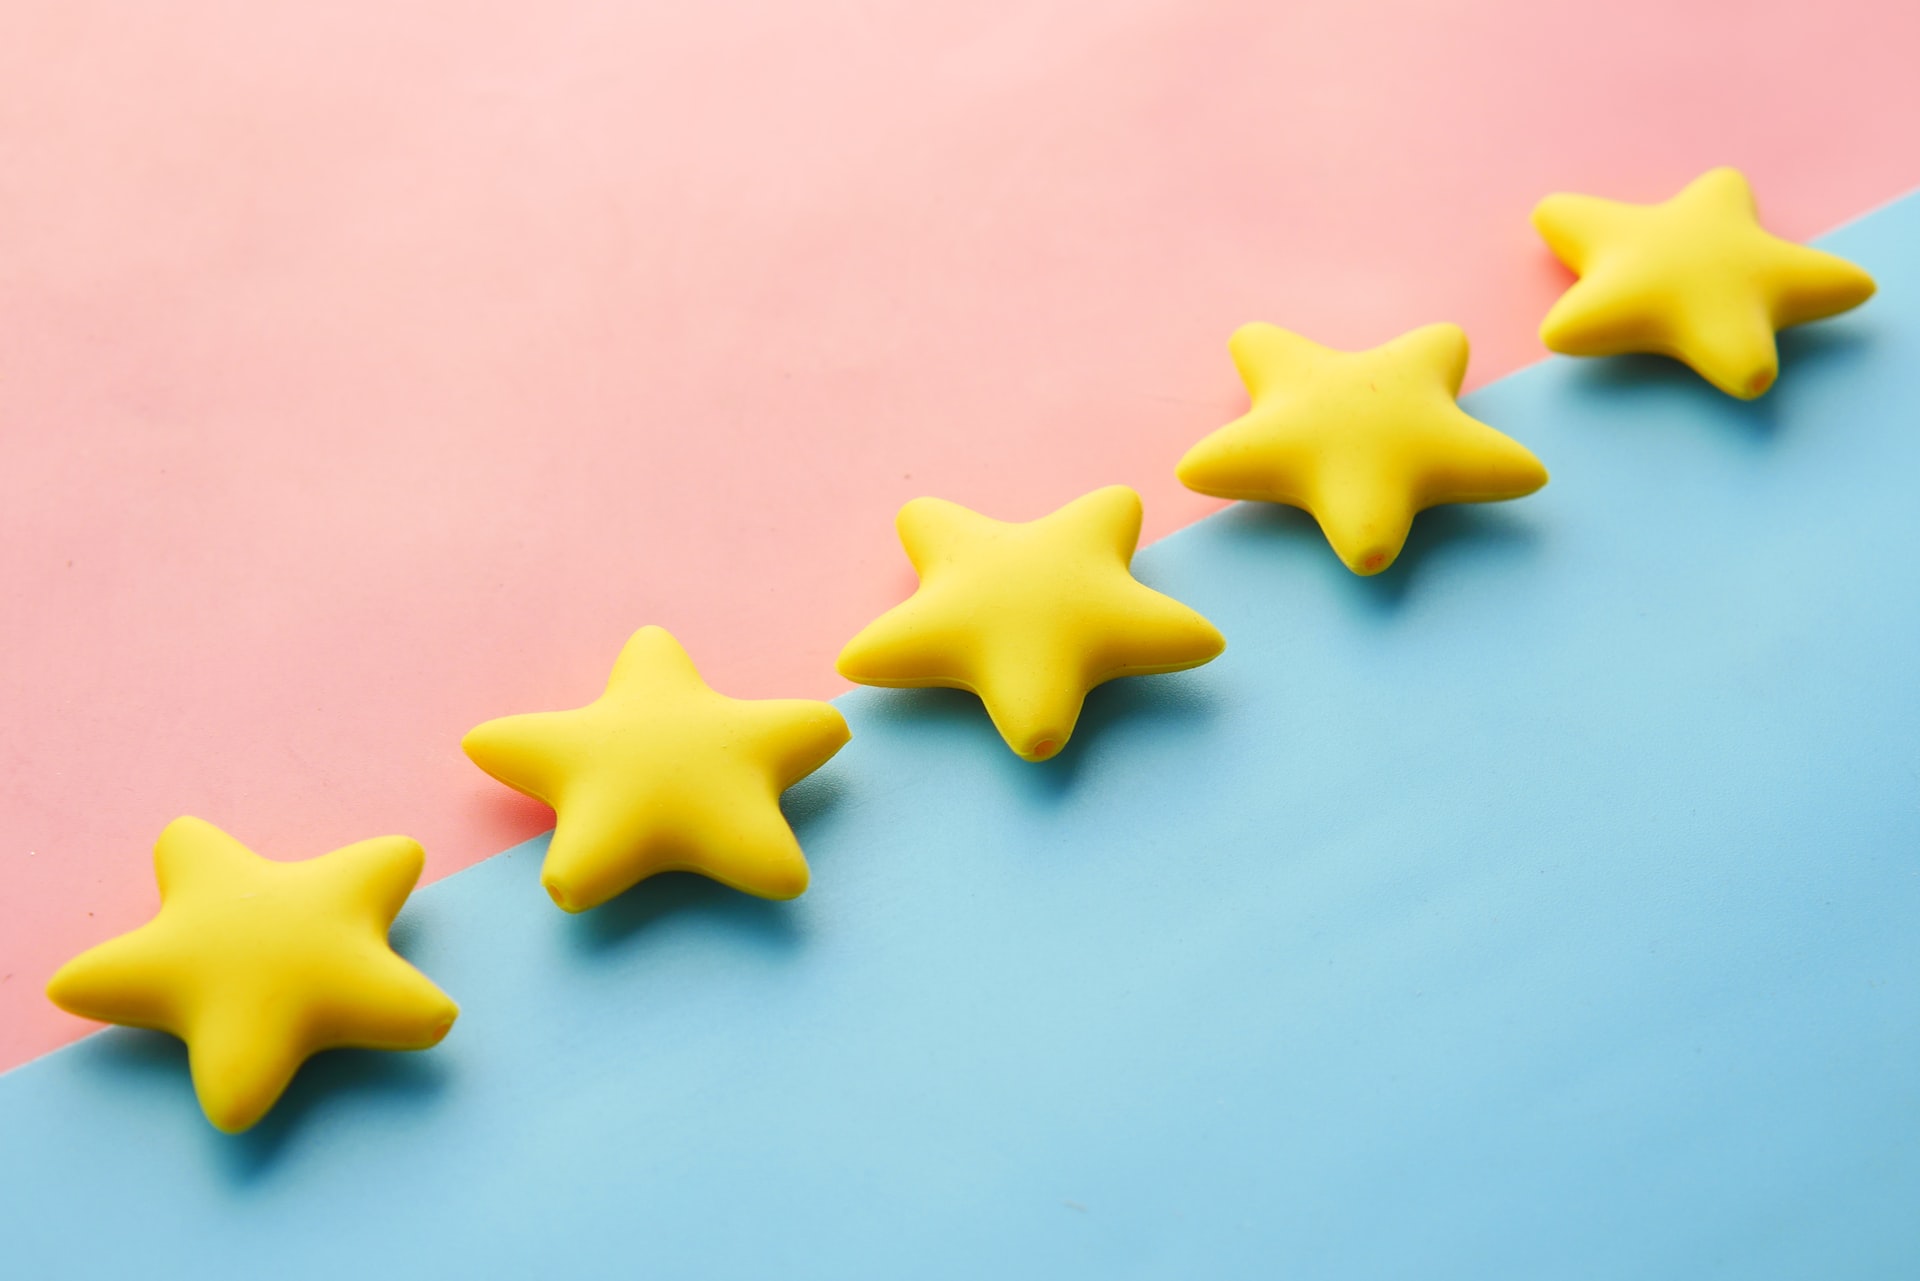 Five yellow stars on a pink and blue background representing Amazon seller reviews.